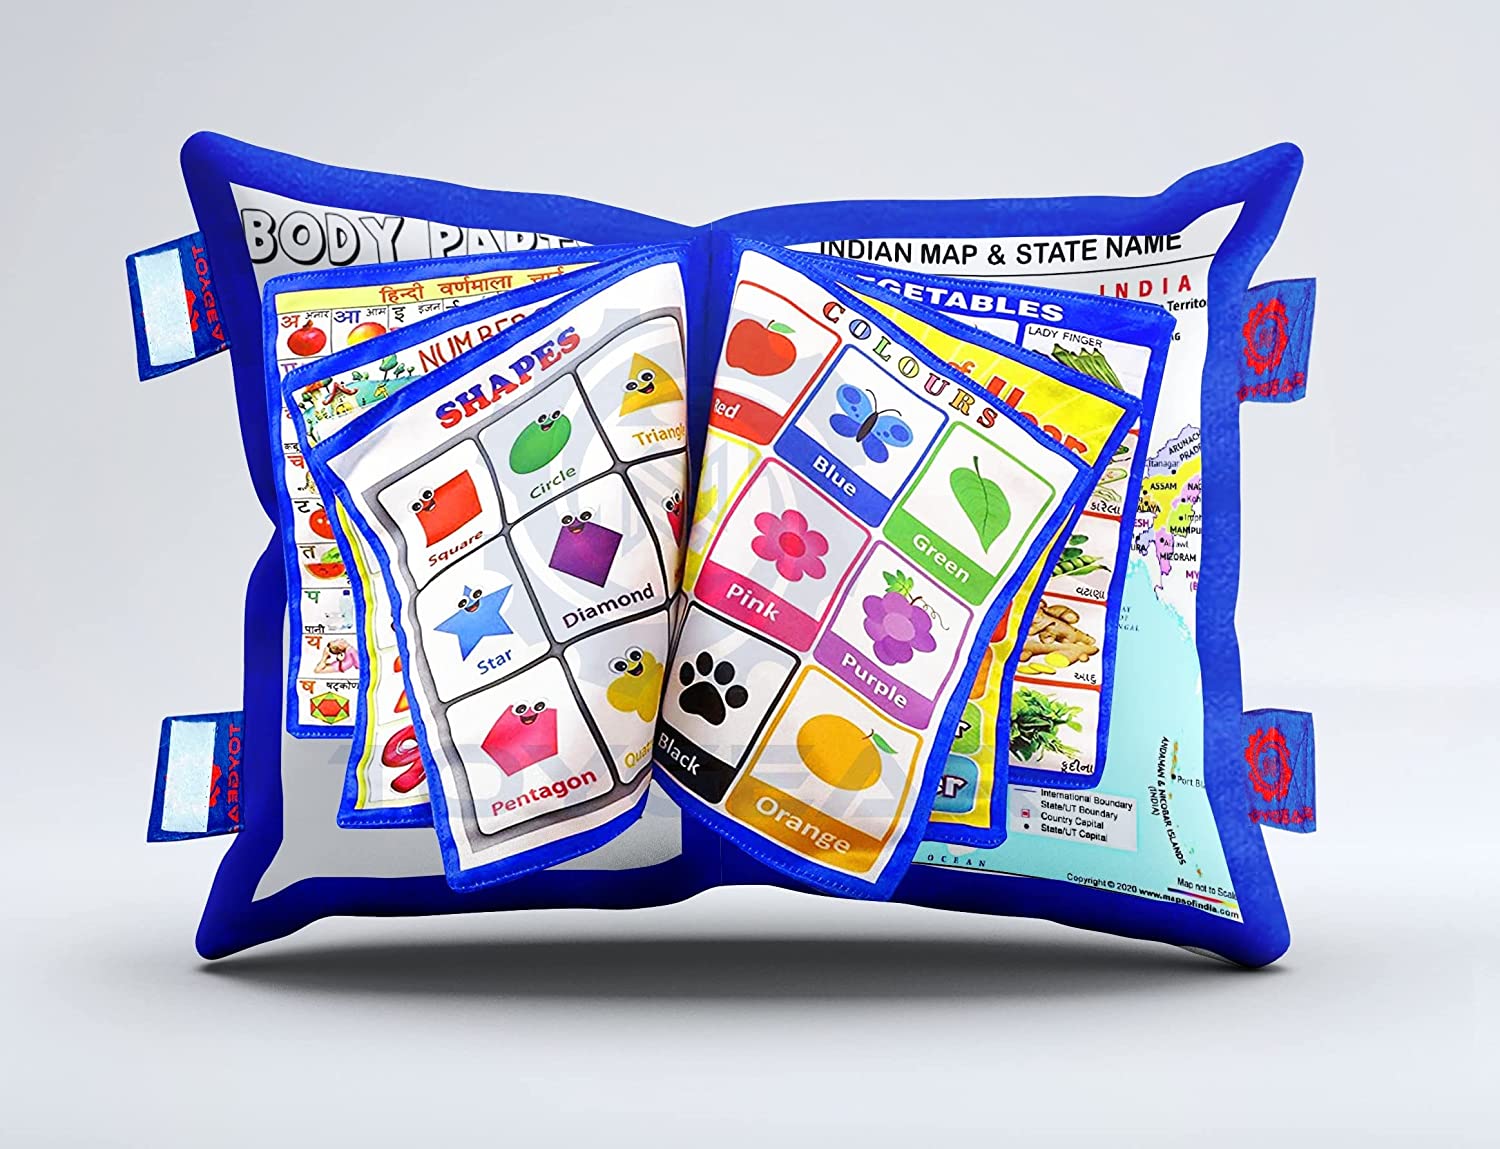 Baby Printed Learning Cushion Soft Toys Pillow Cum Book with English and Hindi Alphabet Color Shape Days Week and Year Name Learning Body Parts Learning for Kids Velvet Cushion Book (RED)